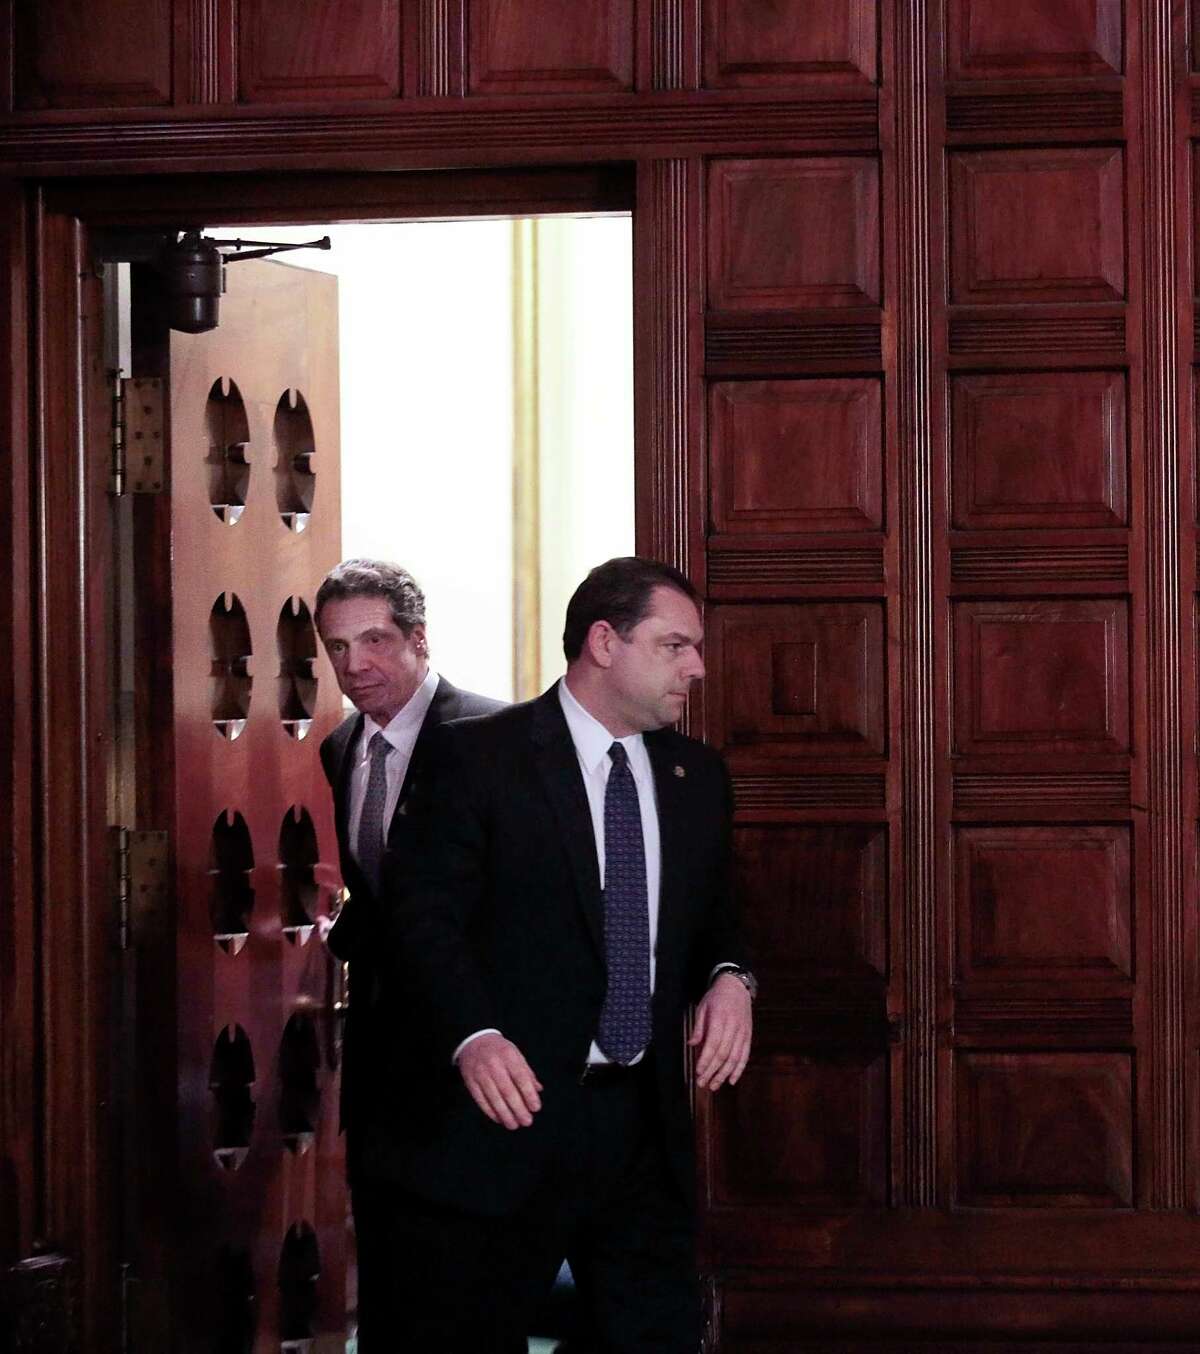 FILE -- Joseph Percoco, right, with Gov. Andrew M. Cuomo of New York in Albany, New York, Feb. 27, 2013. Percoco, a former aide to Cuomo, is among those facing charges in a federal investigation announced Sept. 22, 2016, into the administration?’s attempts to lure jobs and businesses to upstate New York. (Nathaniel Brooks/The New York Times) ORG XMIT: XNYT1